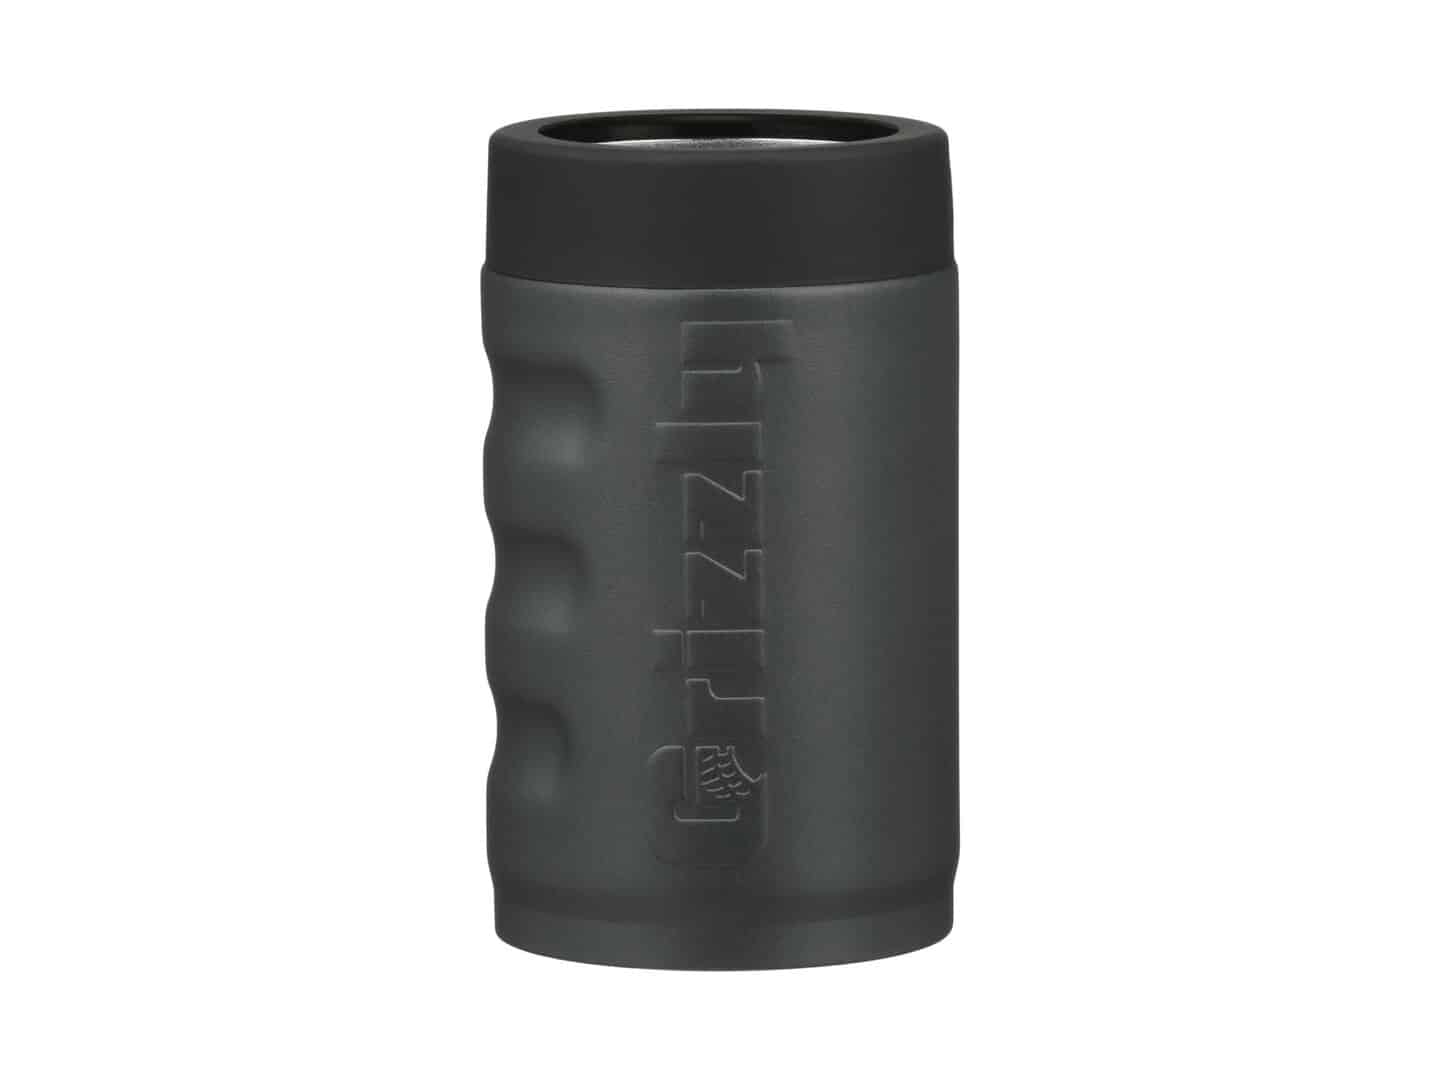 https://www.grizzlycoolers.com/wp-content/uploads/2019/02/GGCan_Charcoal_PI.jpg